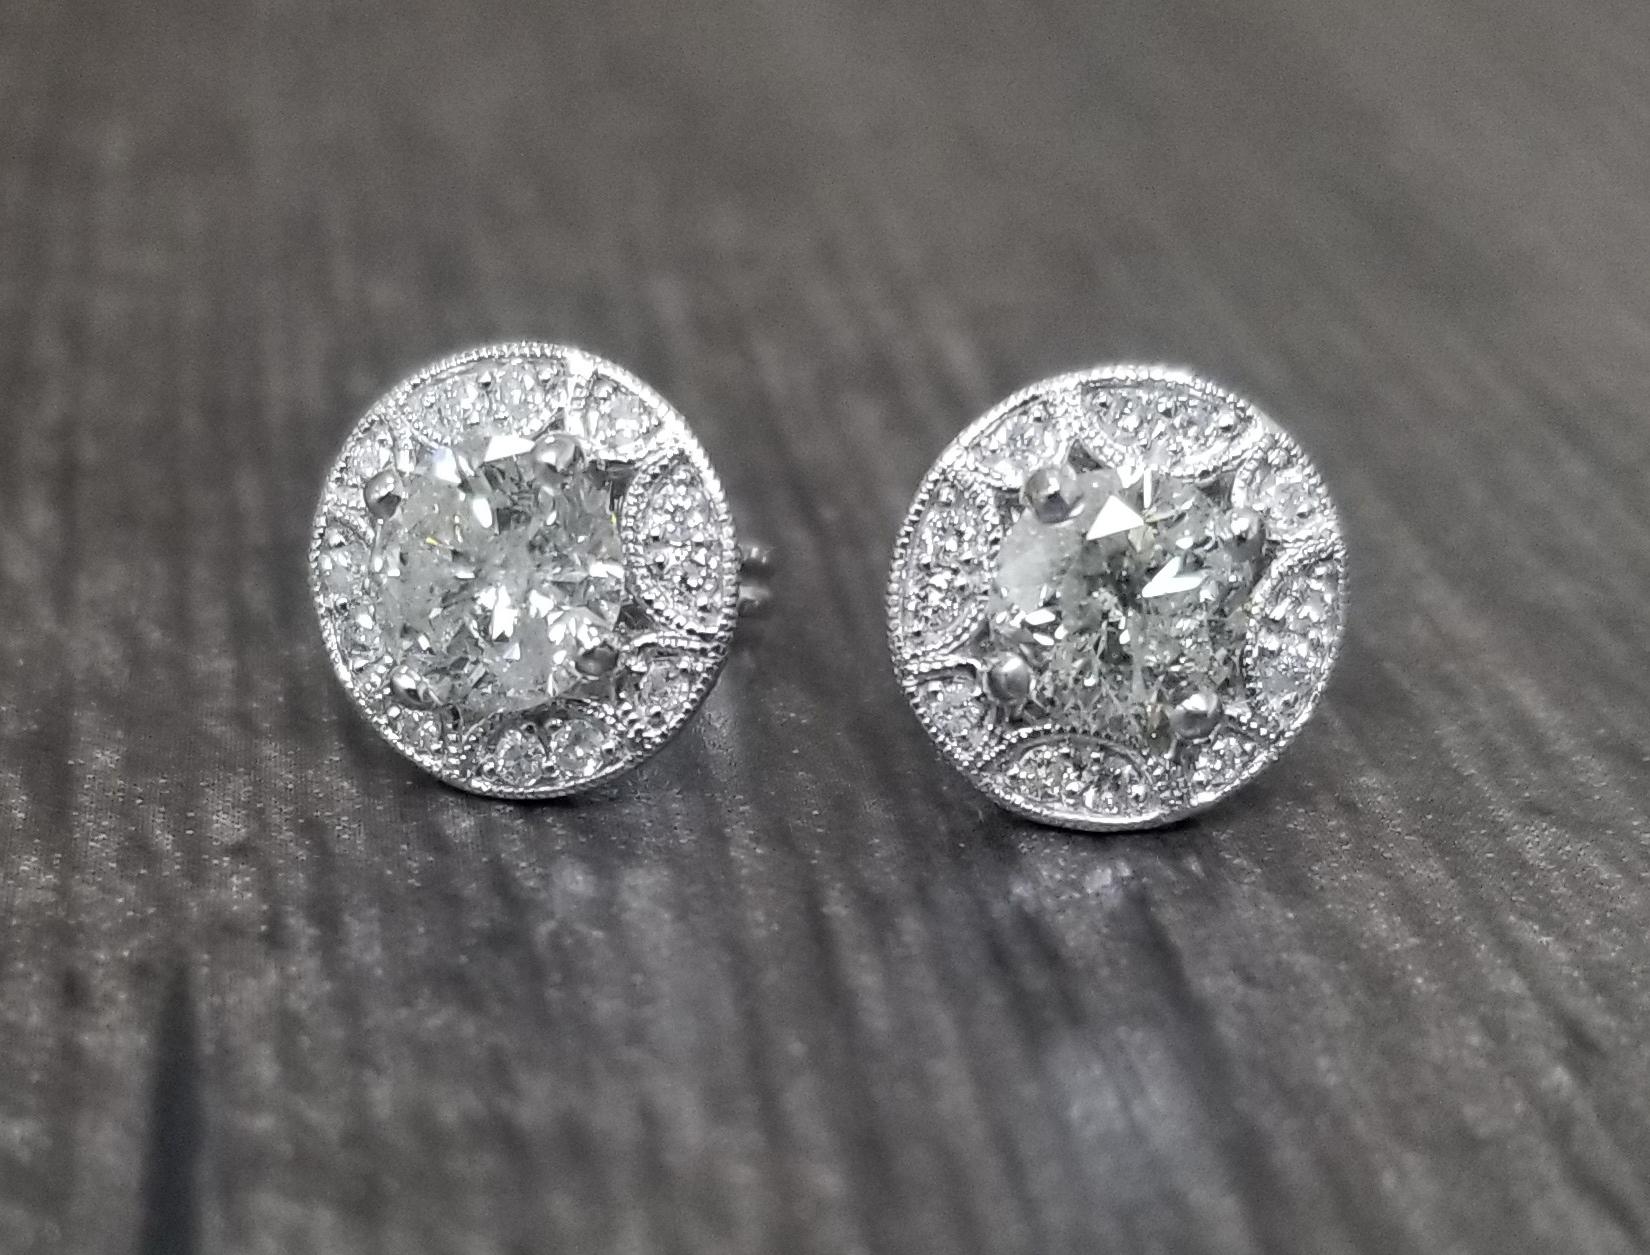 14k white gold diamond stud earrings with halo, containing 2 brilliant cut diamonds; color 